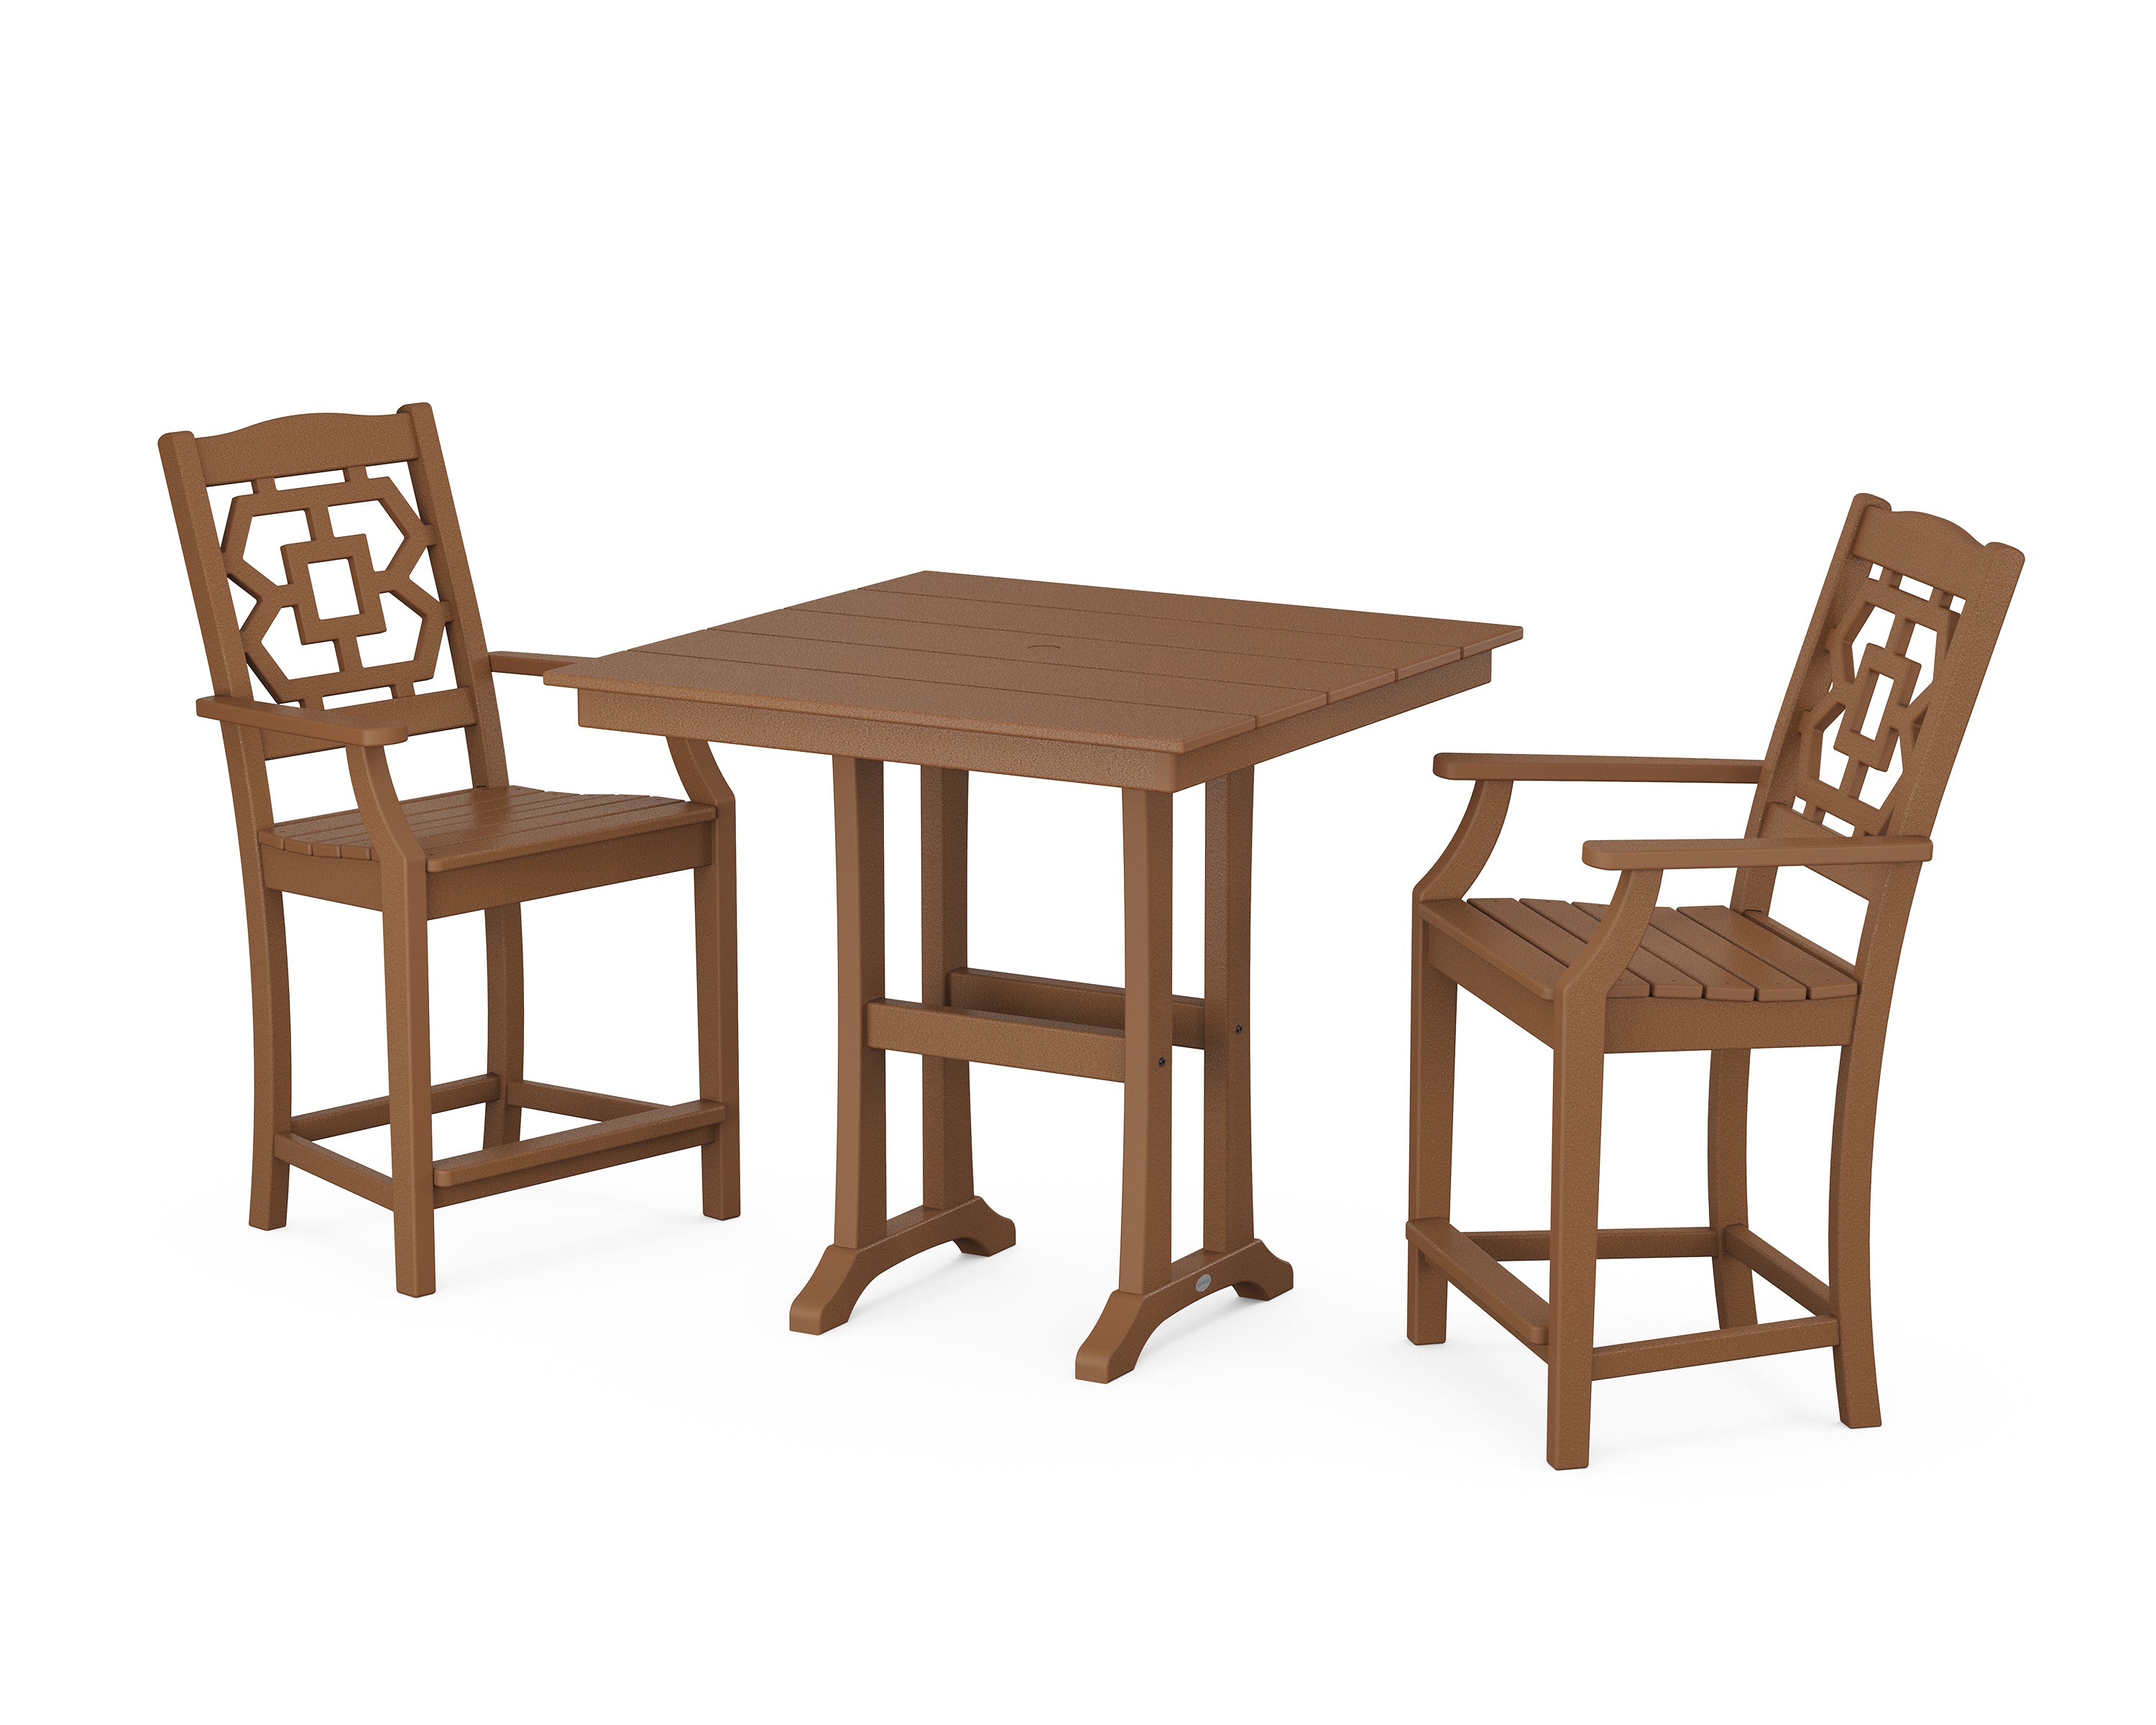 Martha Stewart by POLYWOOD® Chinoiserie 3-Piece Farmhouse Counter Set with Trestle Legs in Teak